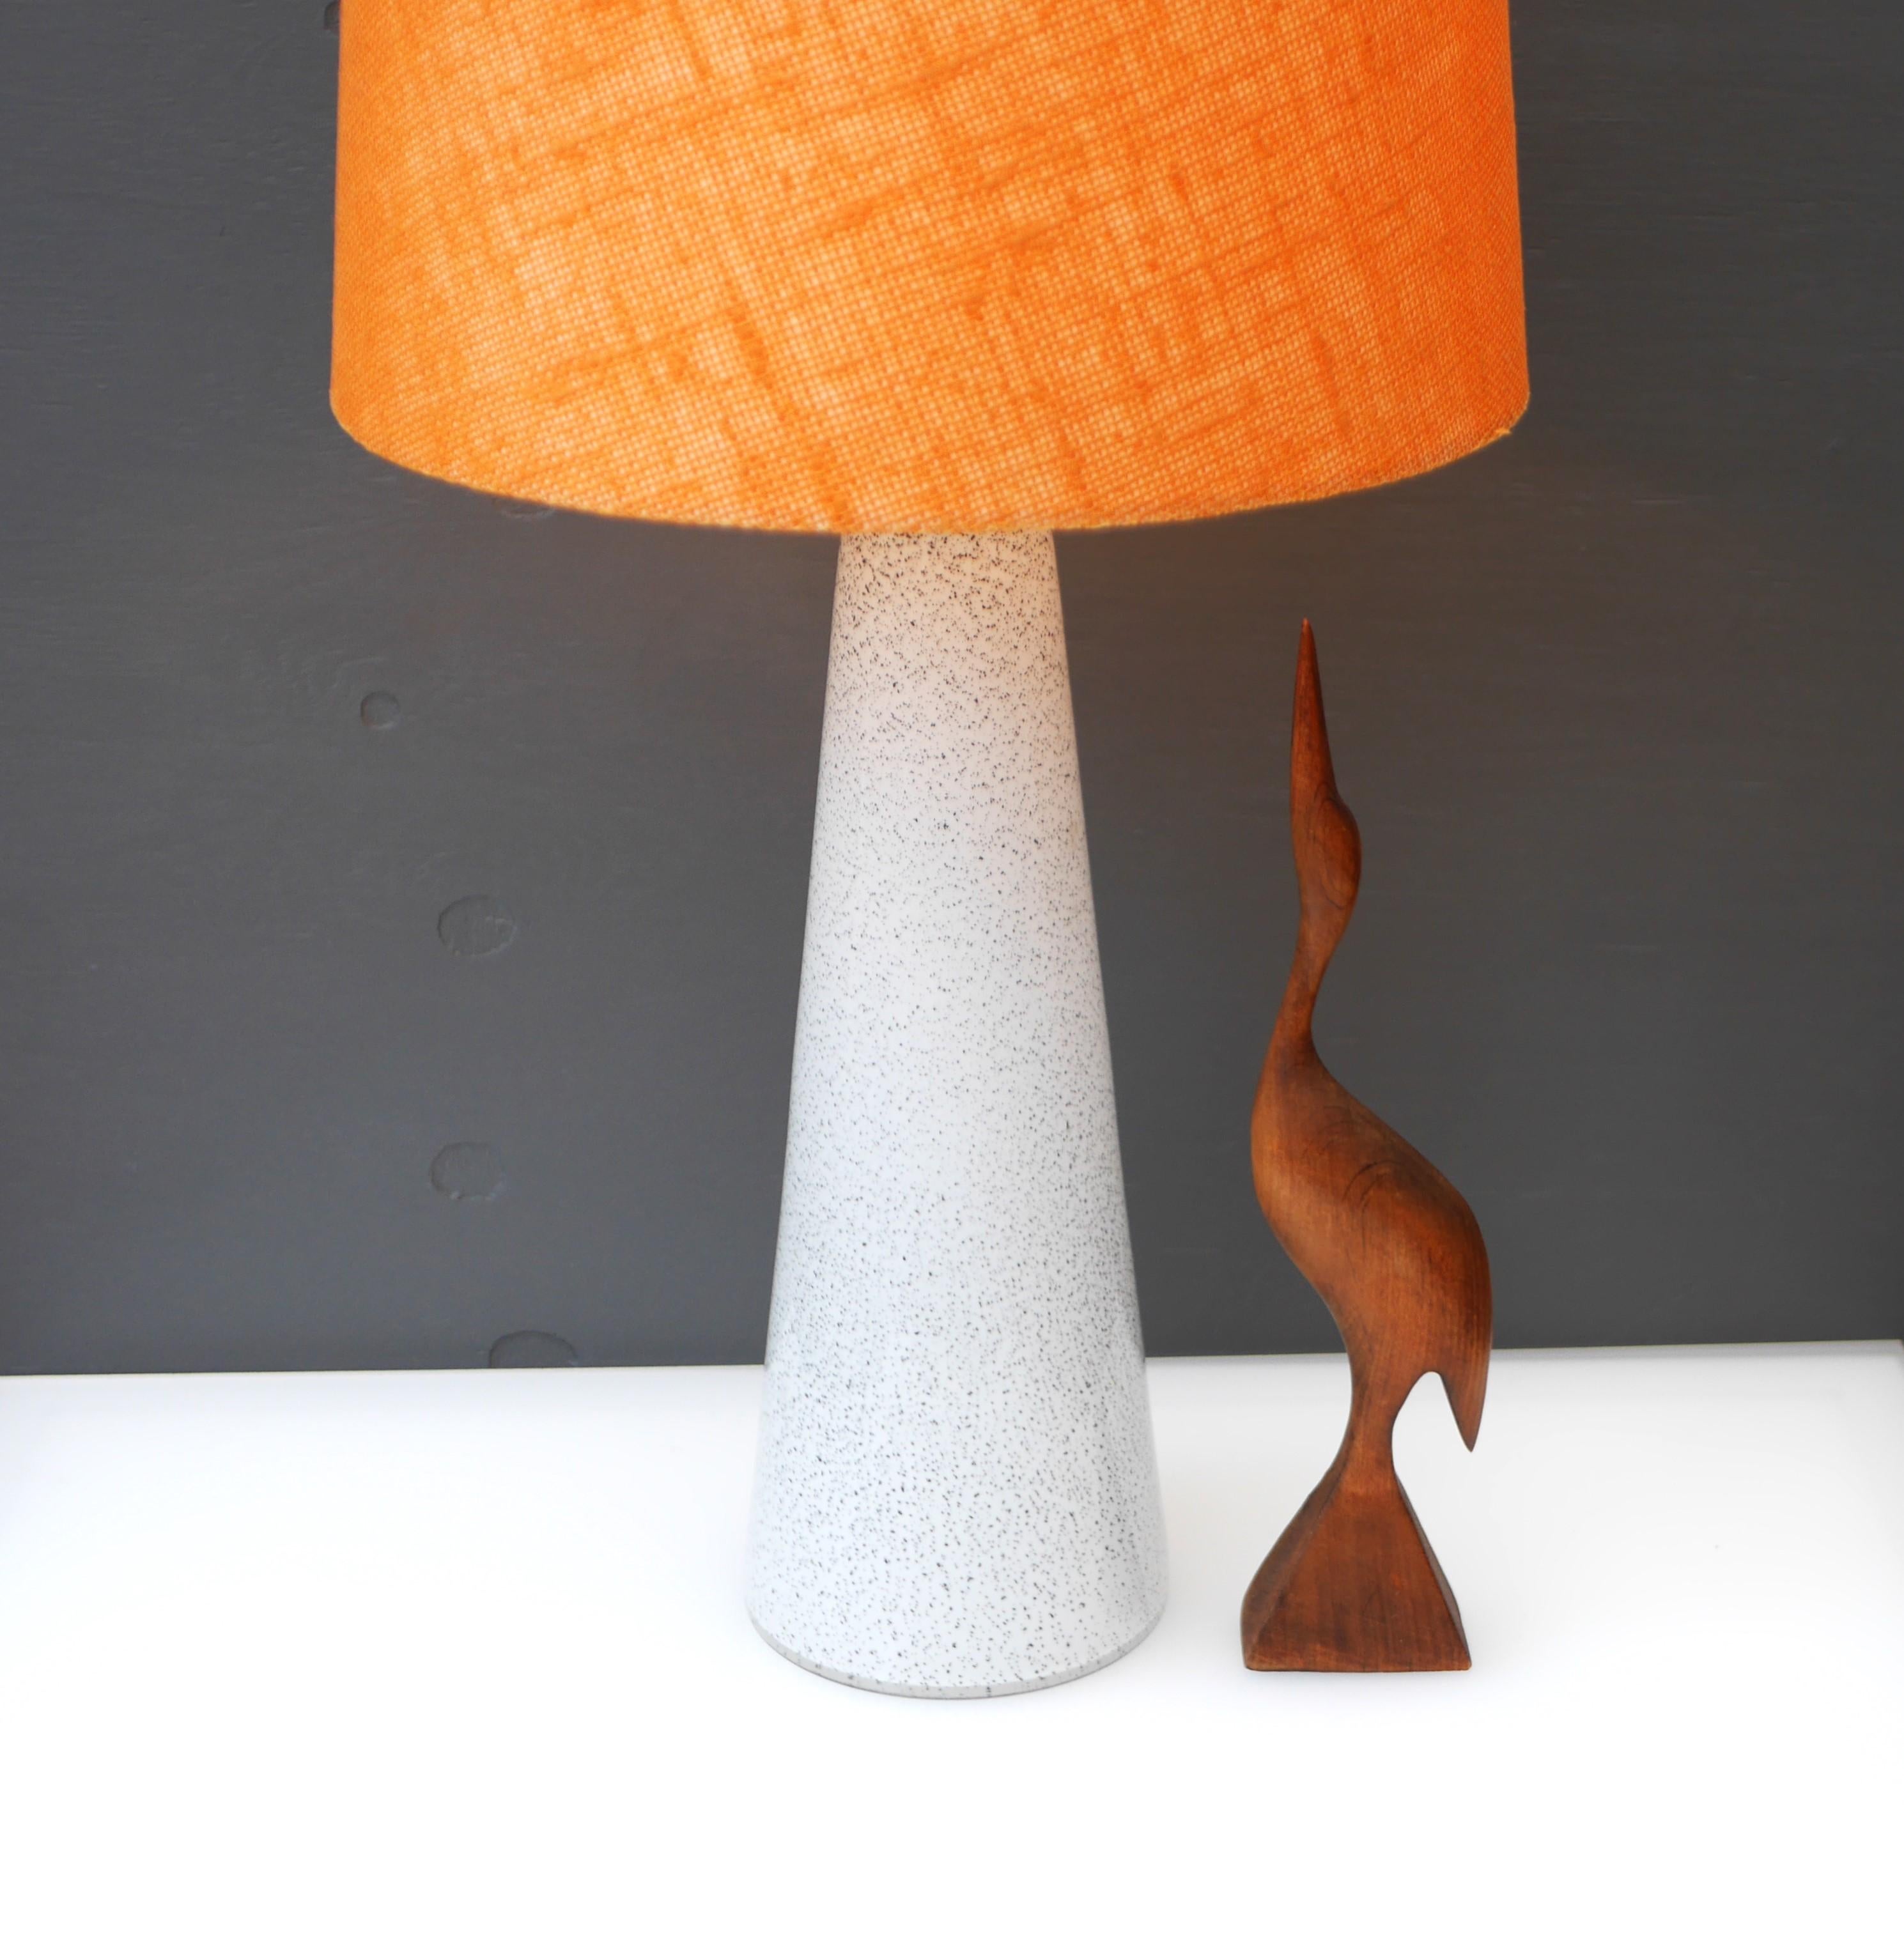 This is a beautiful, elegant, rather tall and slender hand-blown vintage glass lamp base, handmade by the talented Bengt Orup for Hyllinge glasbruk, Sweden. The piece has a beautiful and simple conical shape,  which gives a very modern feeling to